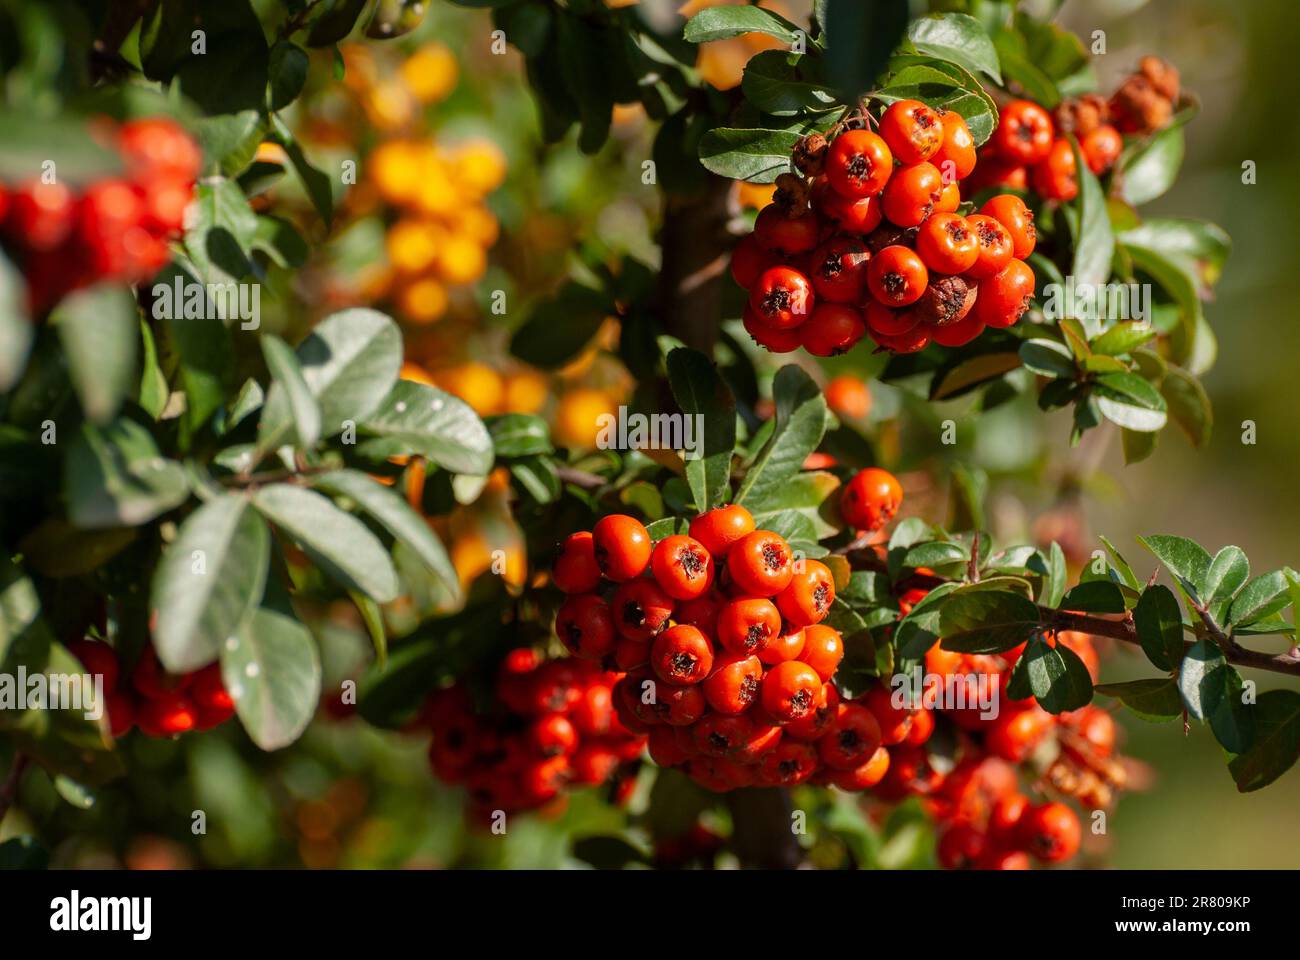 Cotoneaster garden shrub with large number bright red berries, decorative fruit, in sunlight on a sunny autumn day. Stock Photo